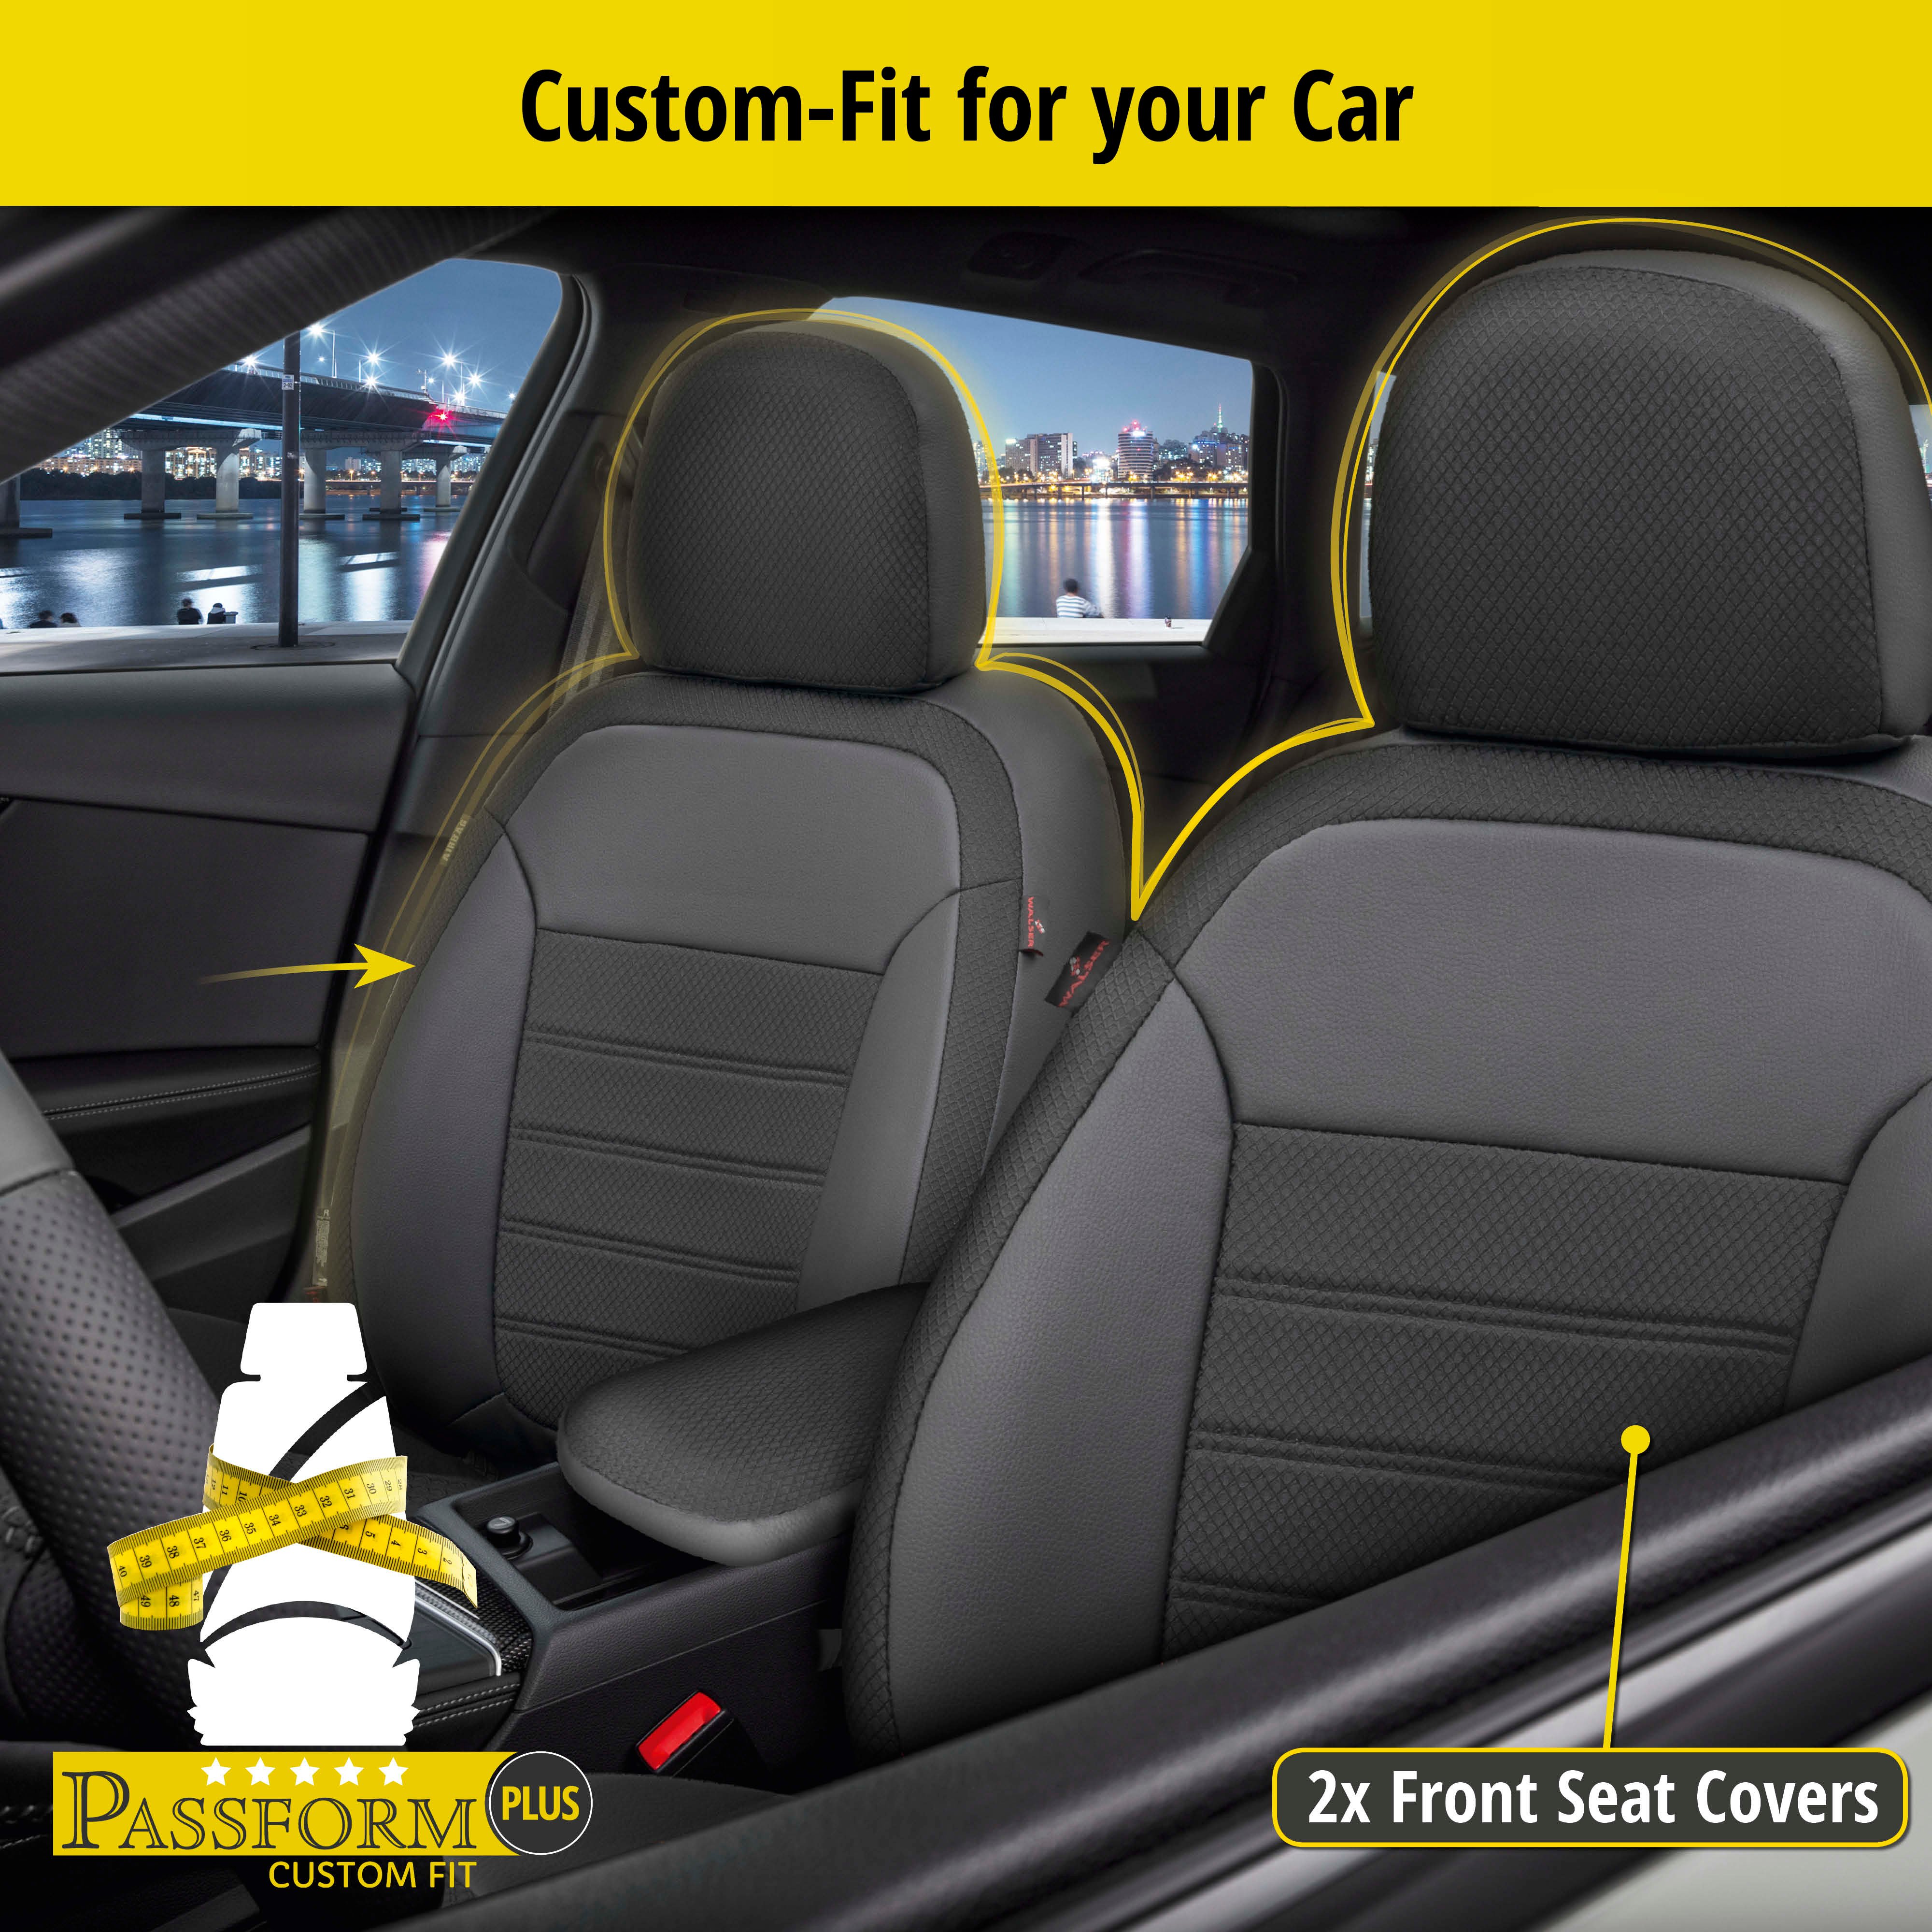 Seat Cover Aversa for Mini Cooper 2013-Today, 2 seat covers for normal seats